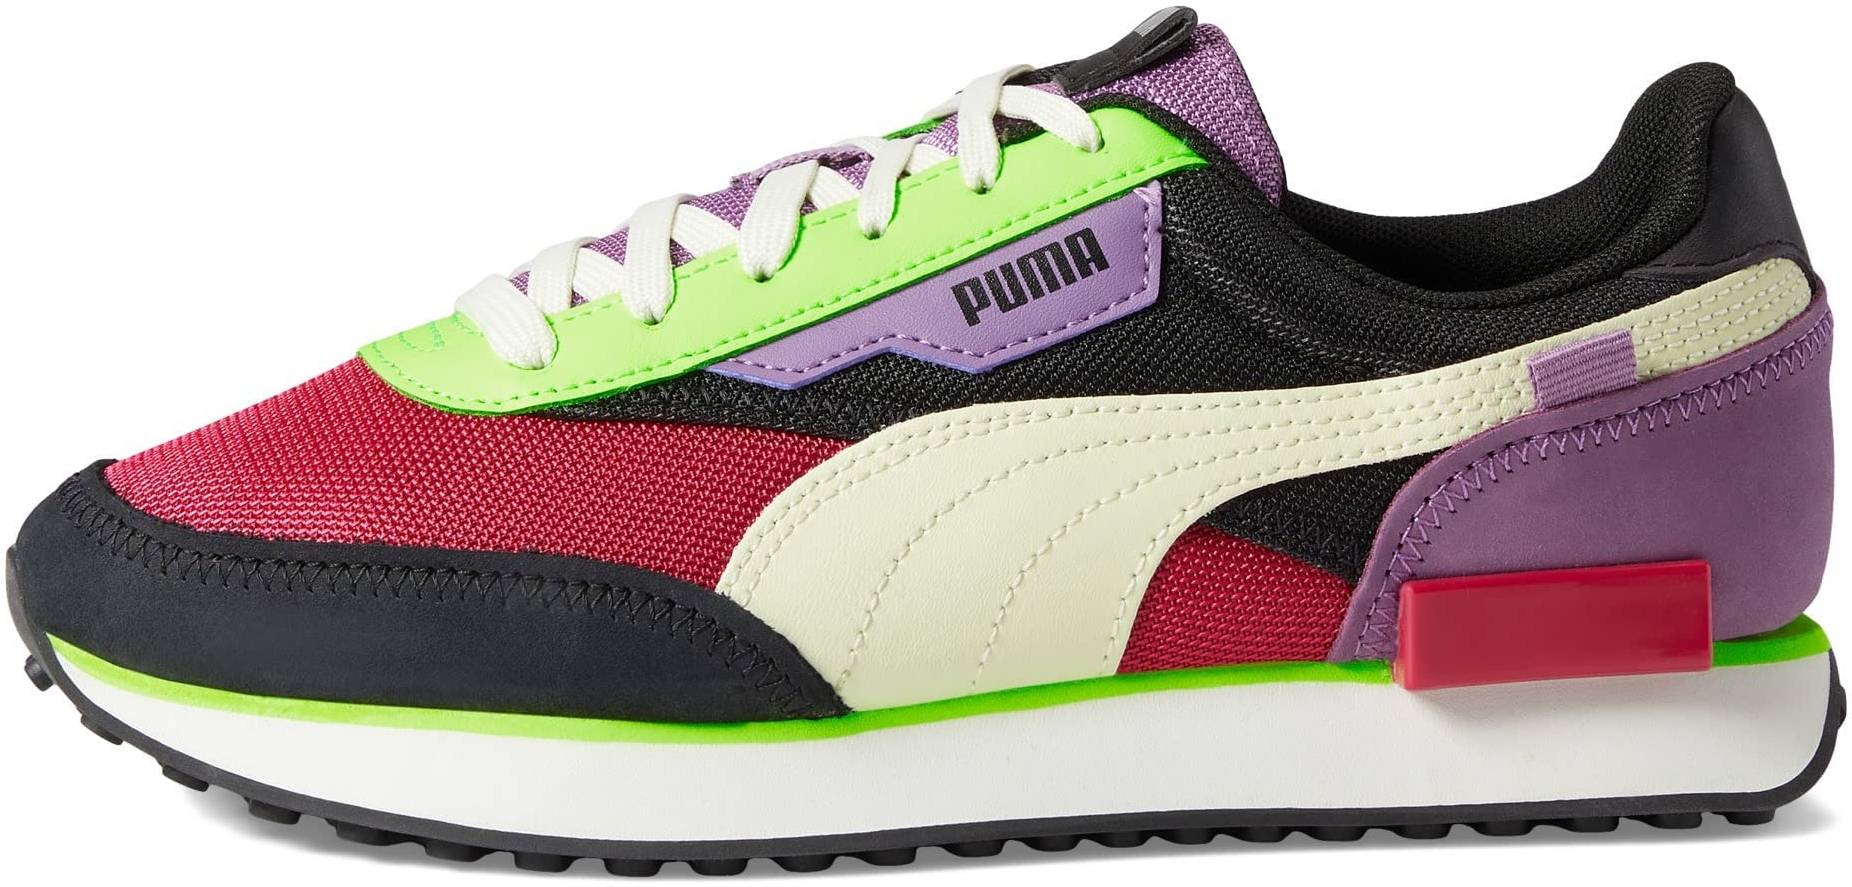 Red Puma Sneakers Save Up To 50 Runrepeat